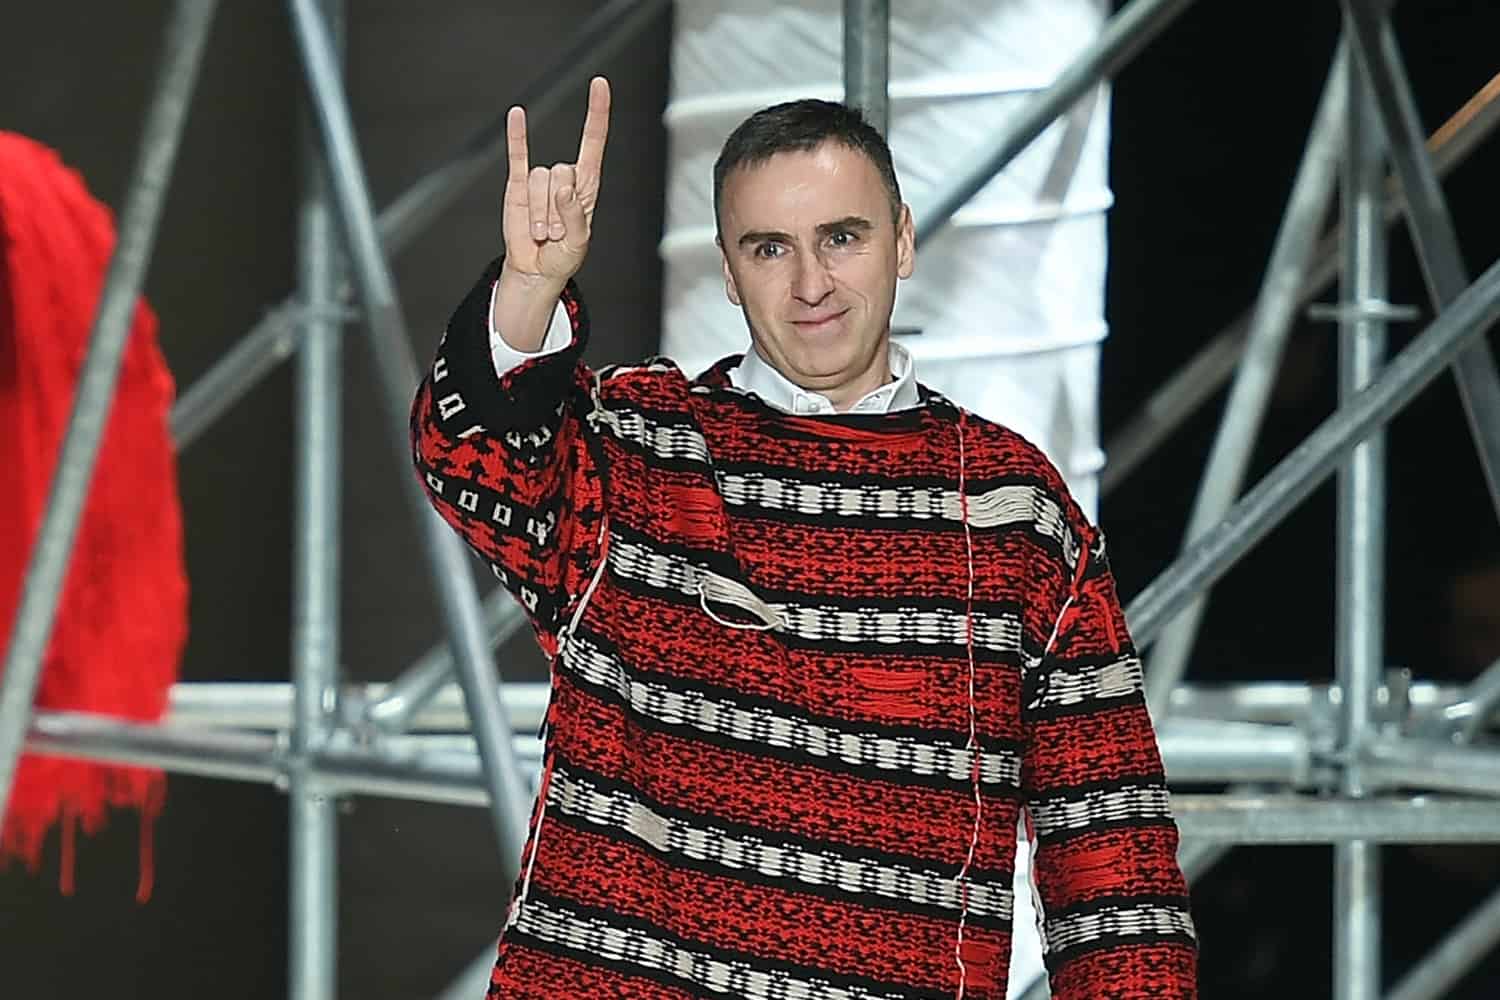 Raf Simons Has a Margiela Collection, Elegance and Charm at Lanvin